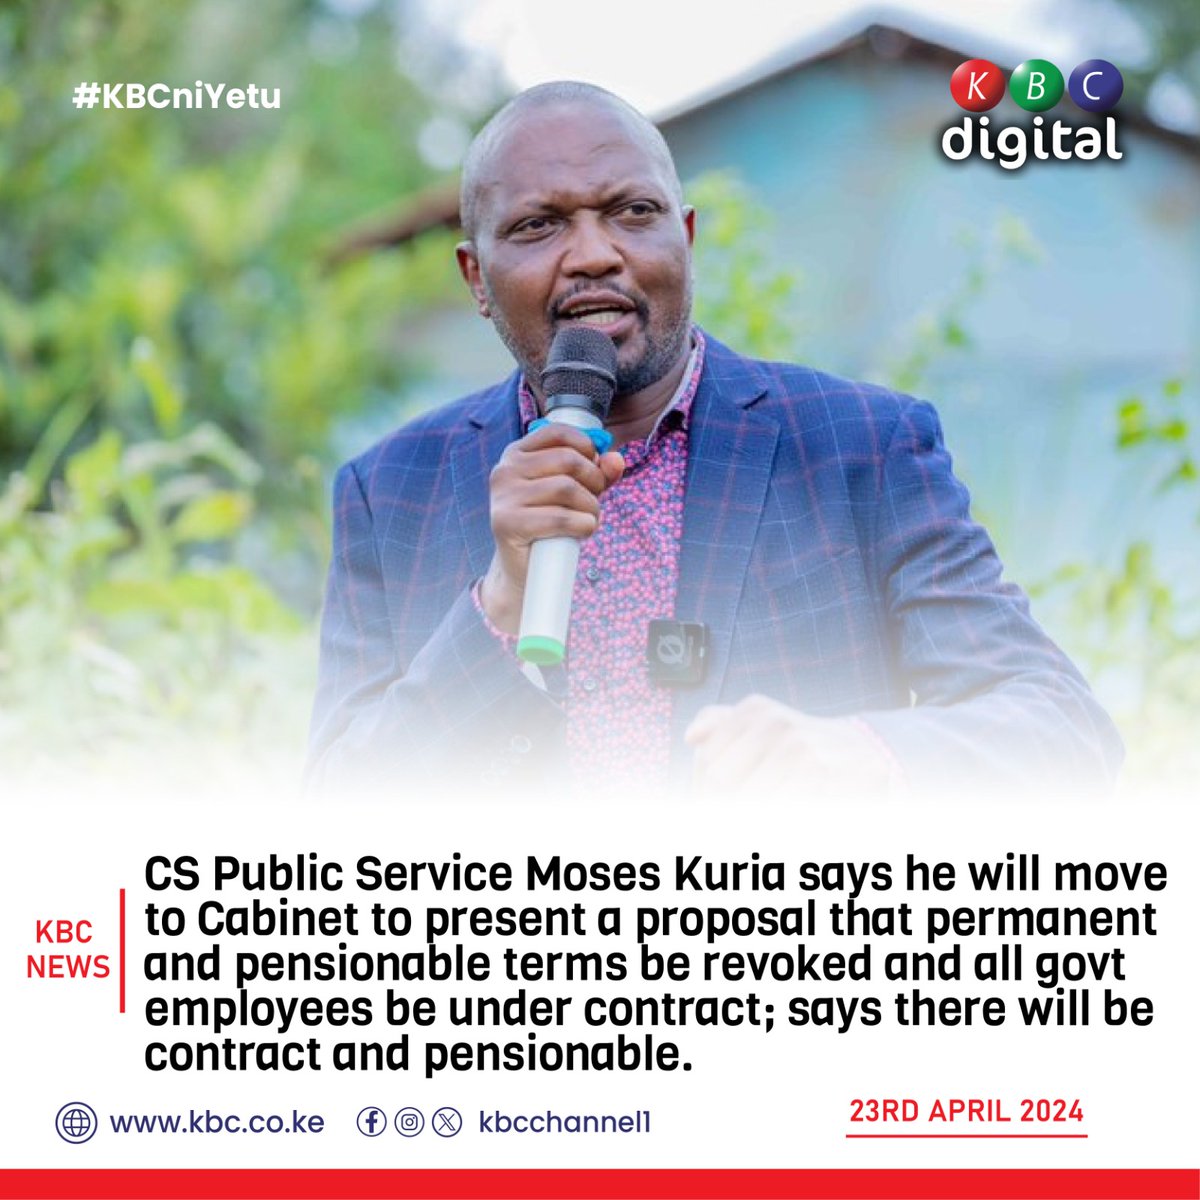 CS Public Service Moses Kuria says he will move to Cabinet to present a proposal that permanent and pensionable terms be revoked and all govt employees be under contract; says there will be contract and pensionable. #KBCniYetu^EM